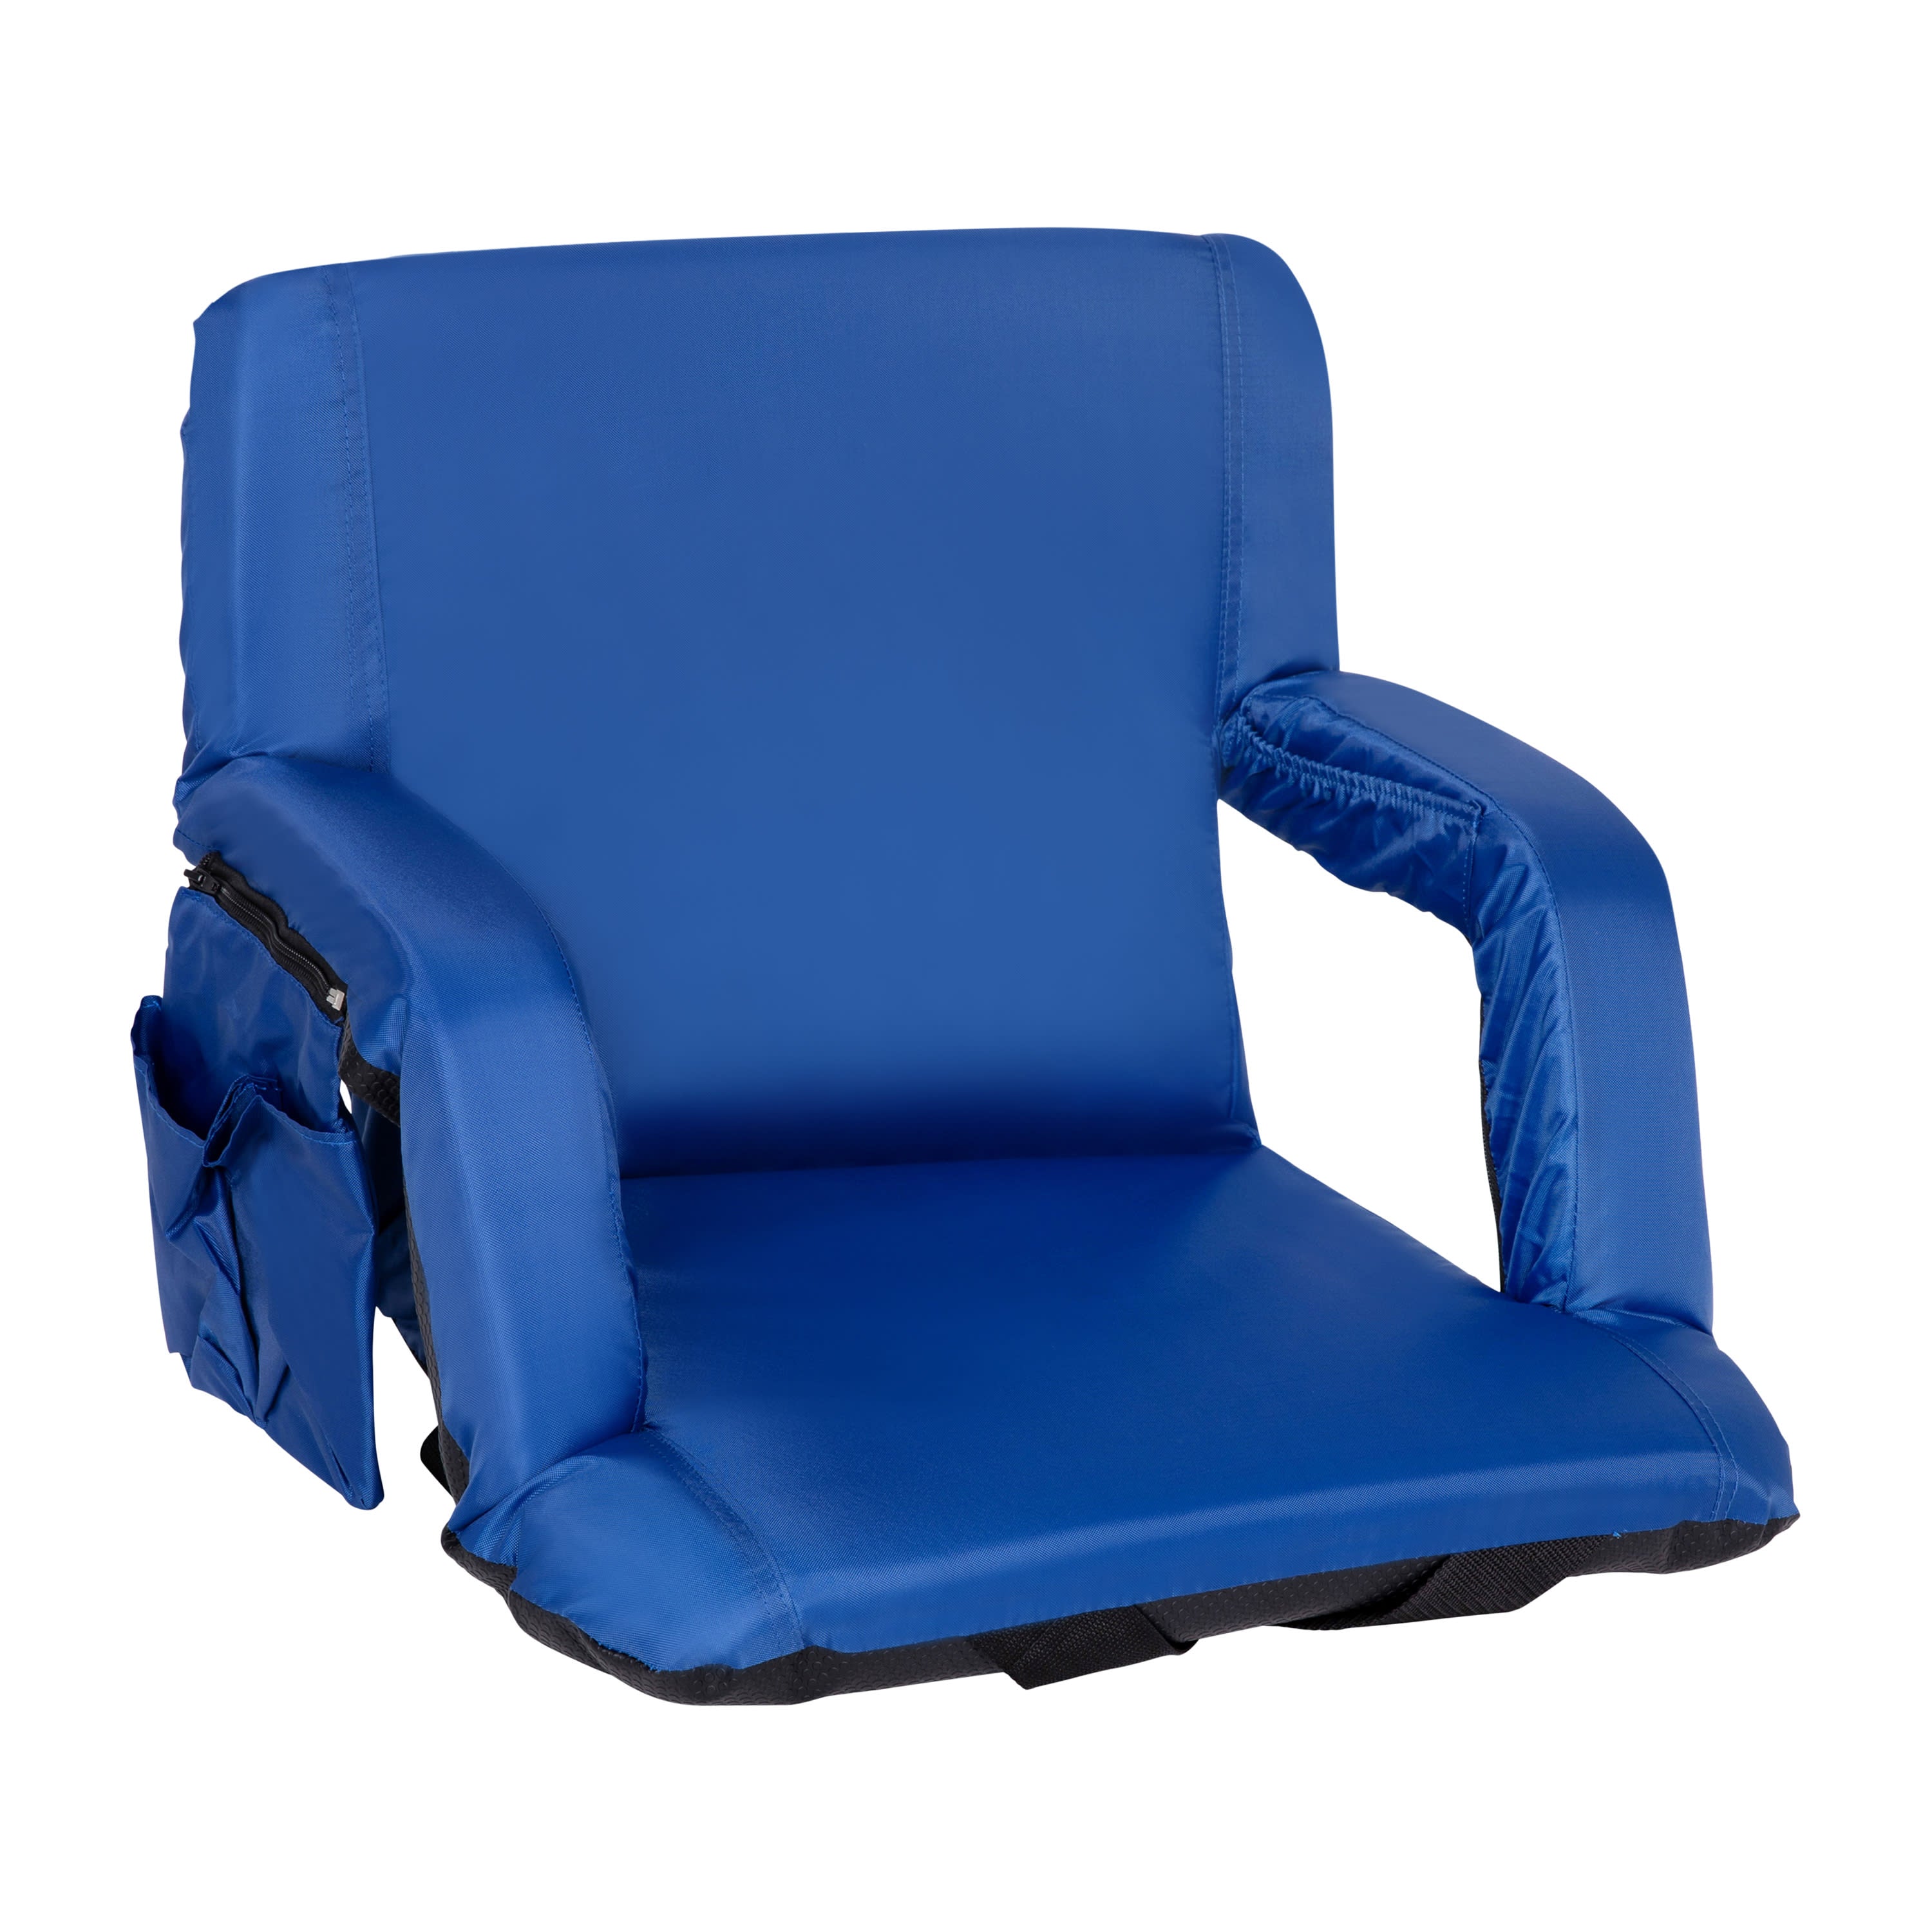 https://www.foldingchairs4less.com/cdn/shop/files/Portable_Lightweight_Reclining_Stadium_Chair_with_Armrests__Padded_Back___Seat_with_Dual_Storage_Pockets_and_Backpack_Straps_2023-11-02T09-07-48Z_1_3000x.jpg?v=1701441347